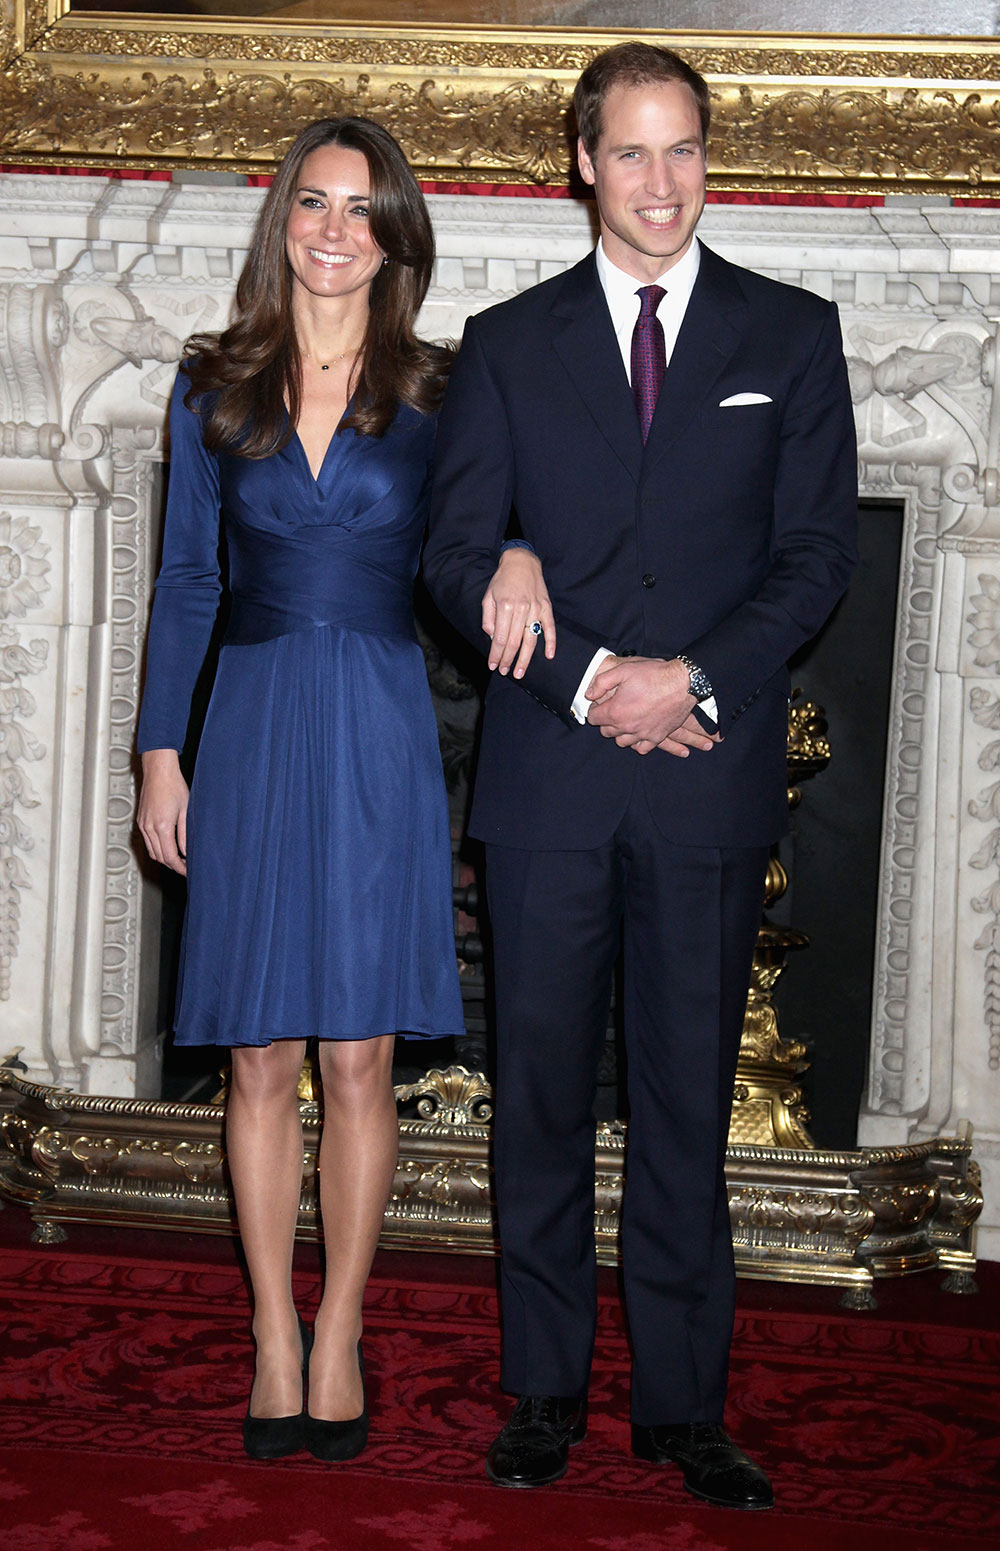 Prince William And Kate Middleton’s Royal Engagement, 2010